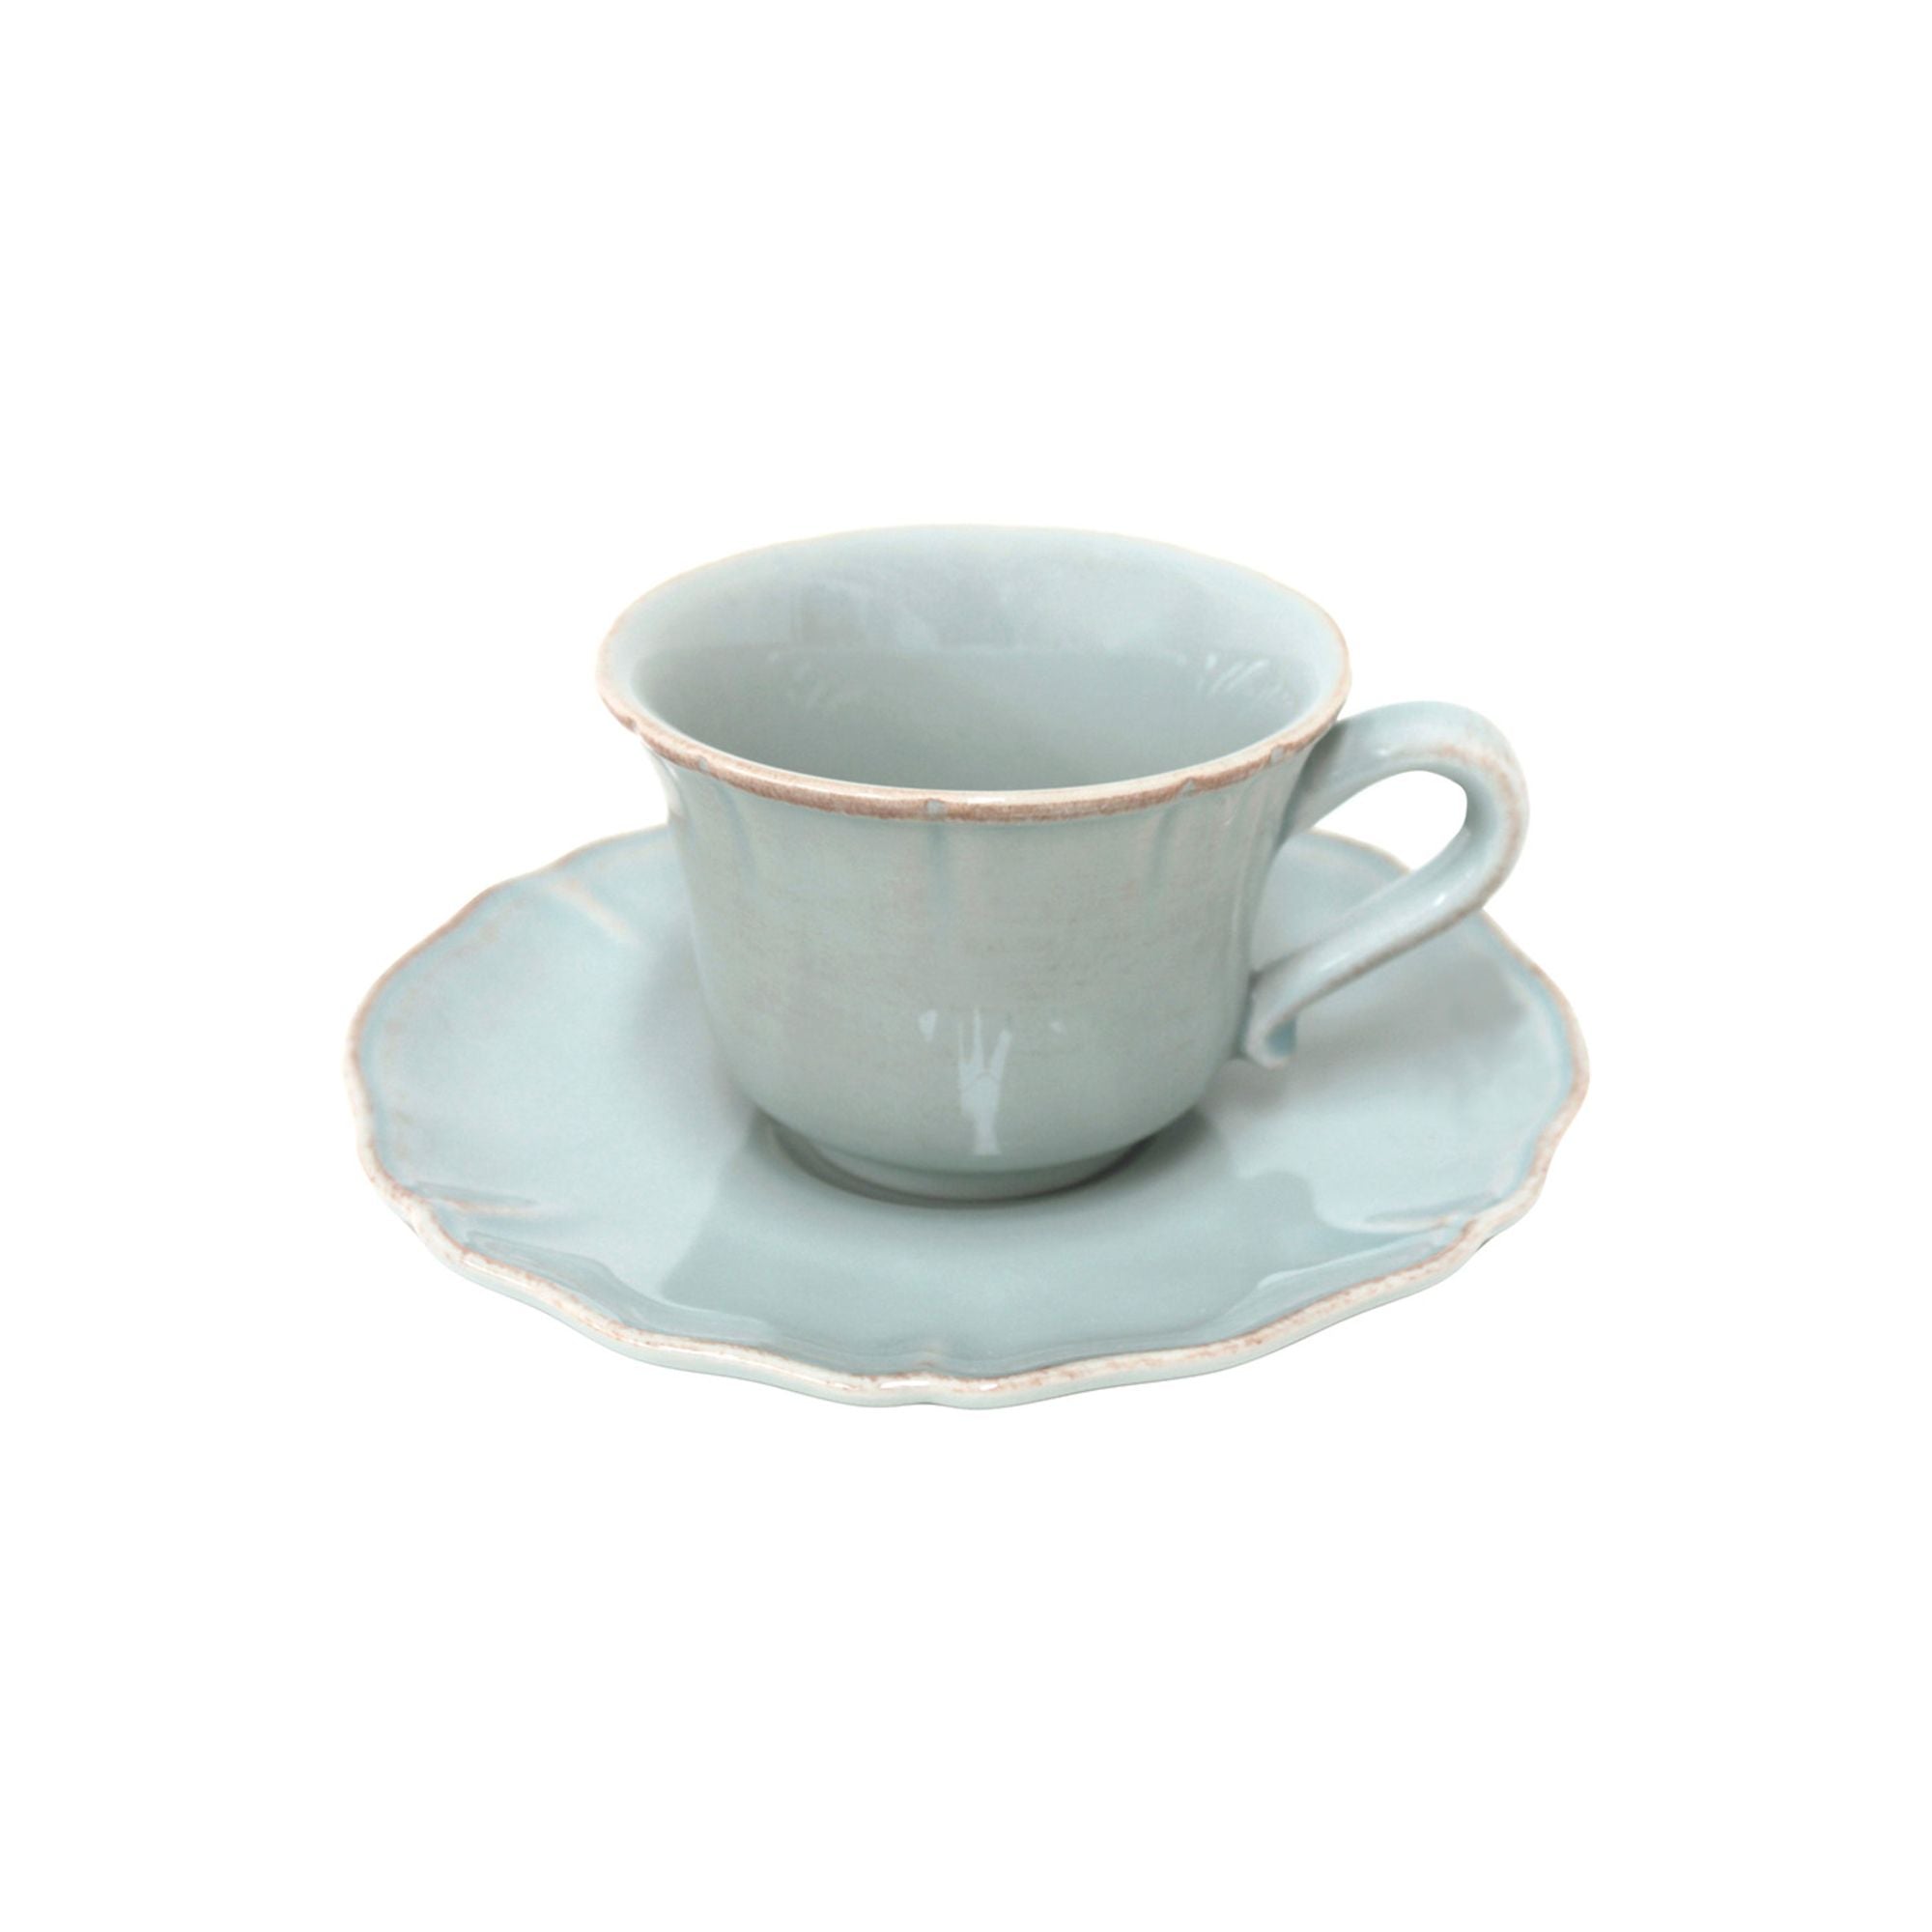 Alentejo Tea Cup and Saucer 7 oz. Turquoise